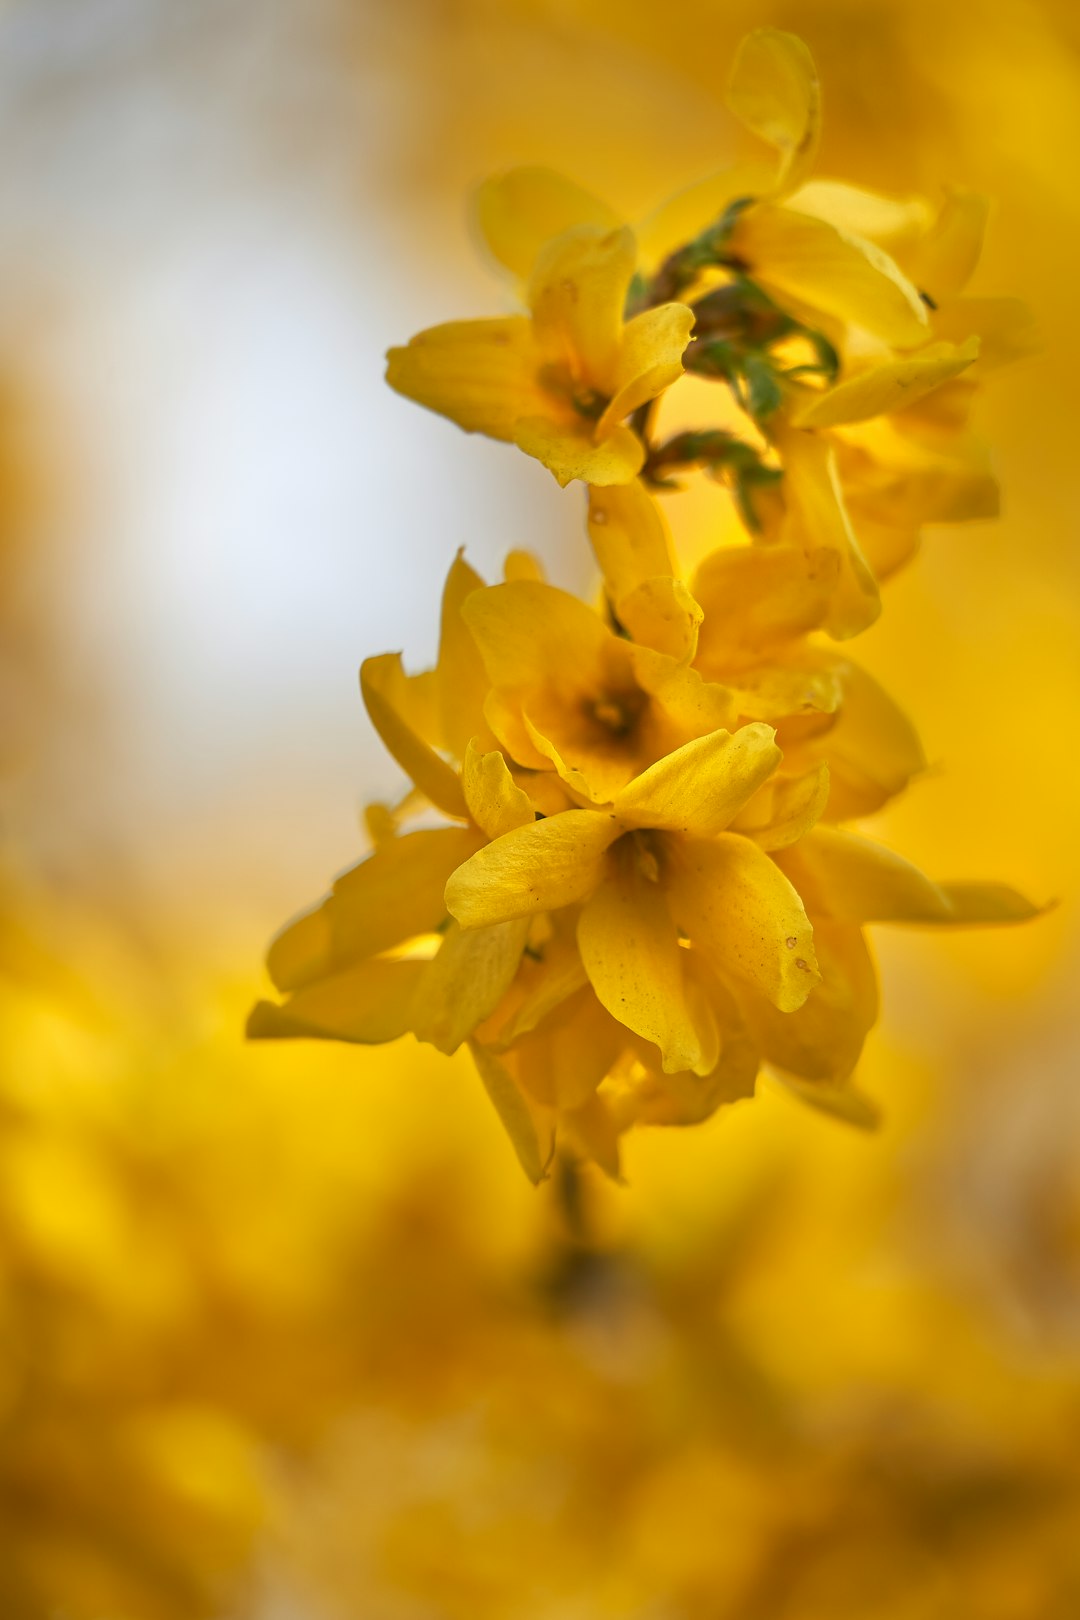 yellow petaled flower in close-up photography